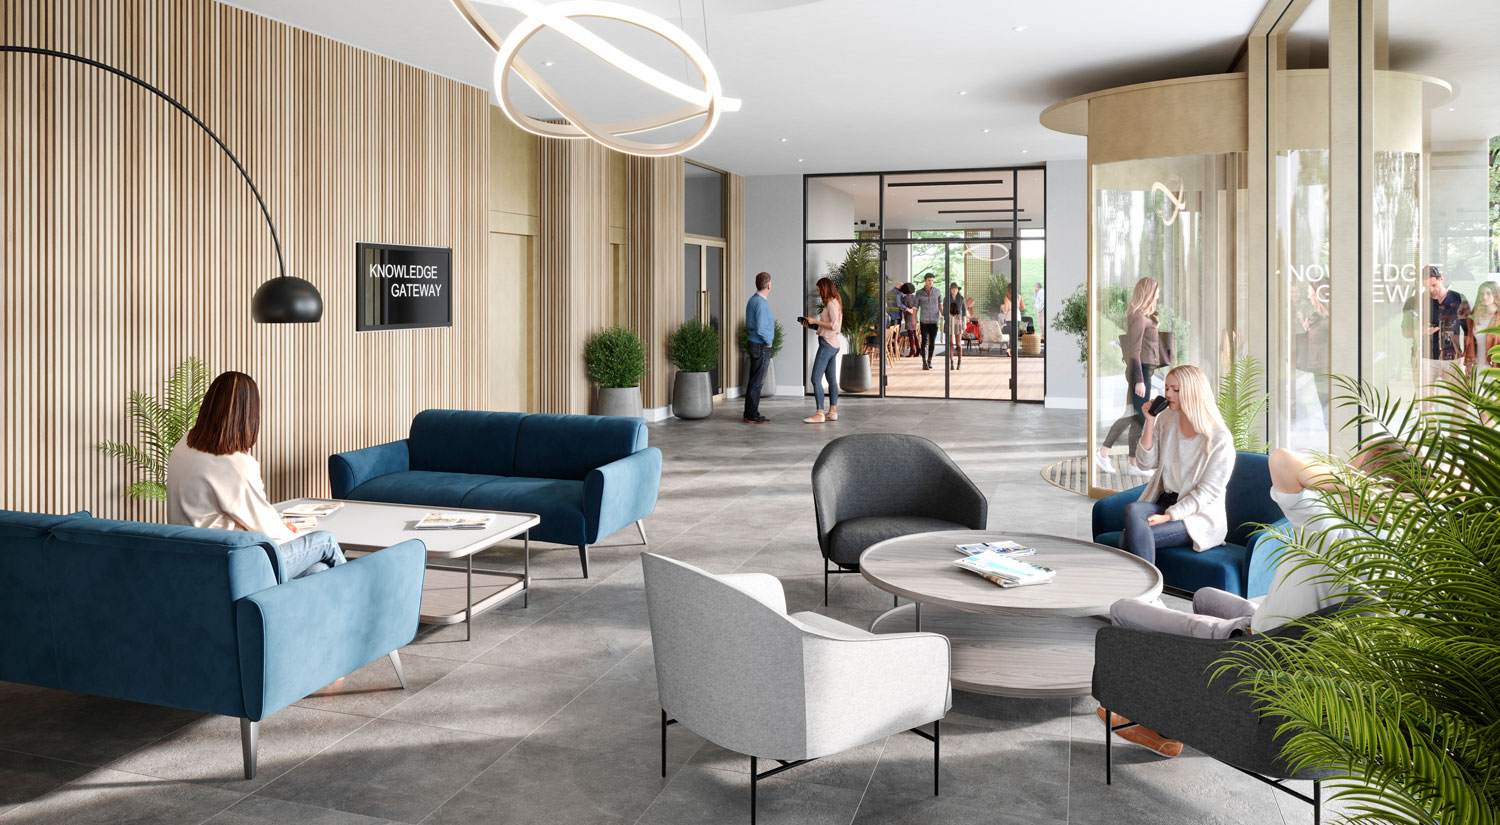 Artist's impression of lobby area at Parkside